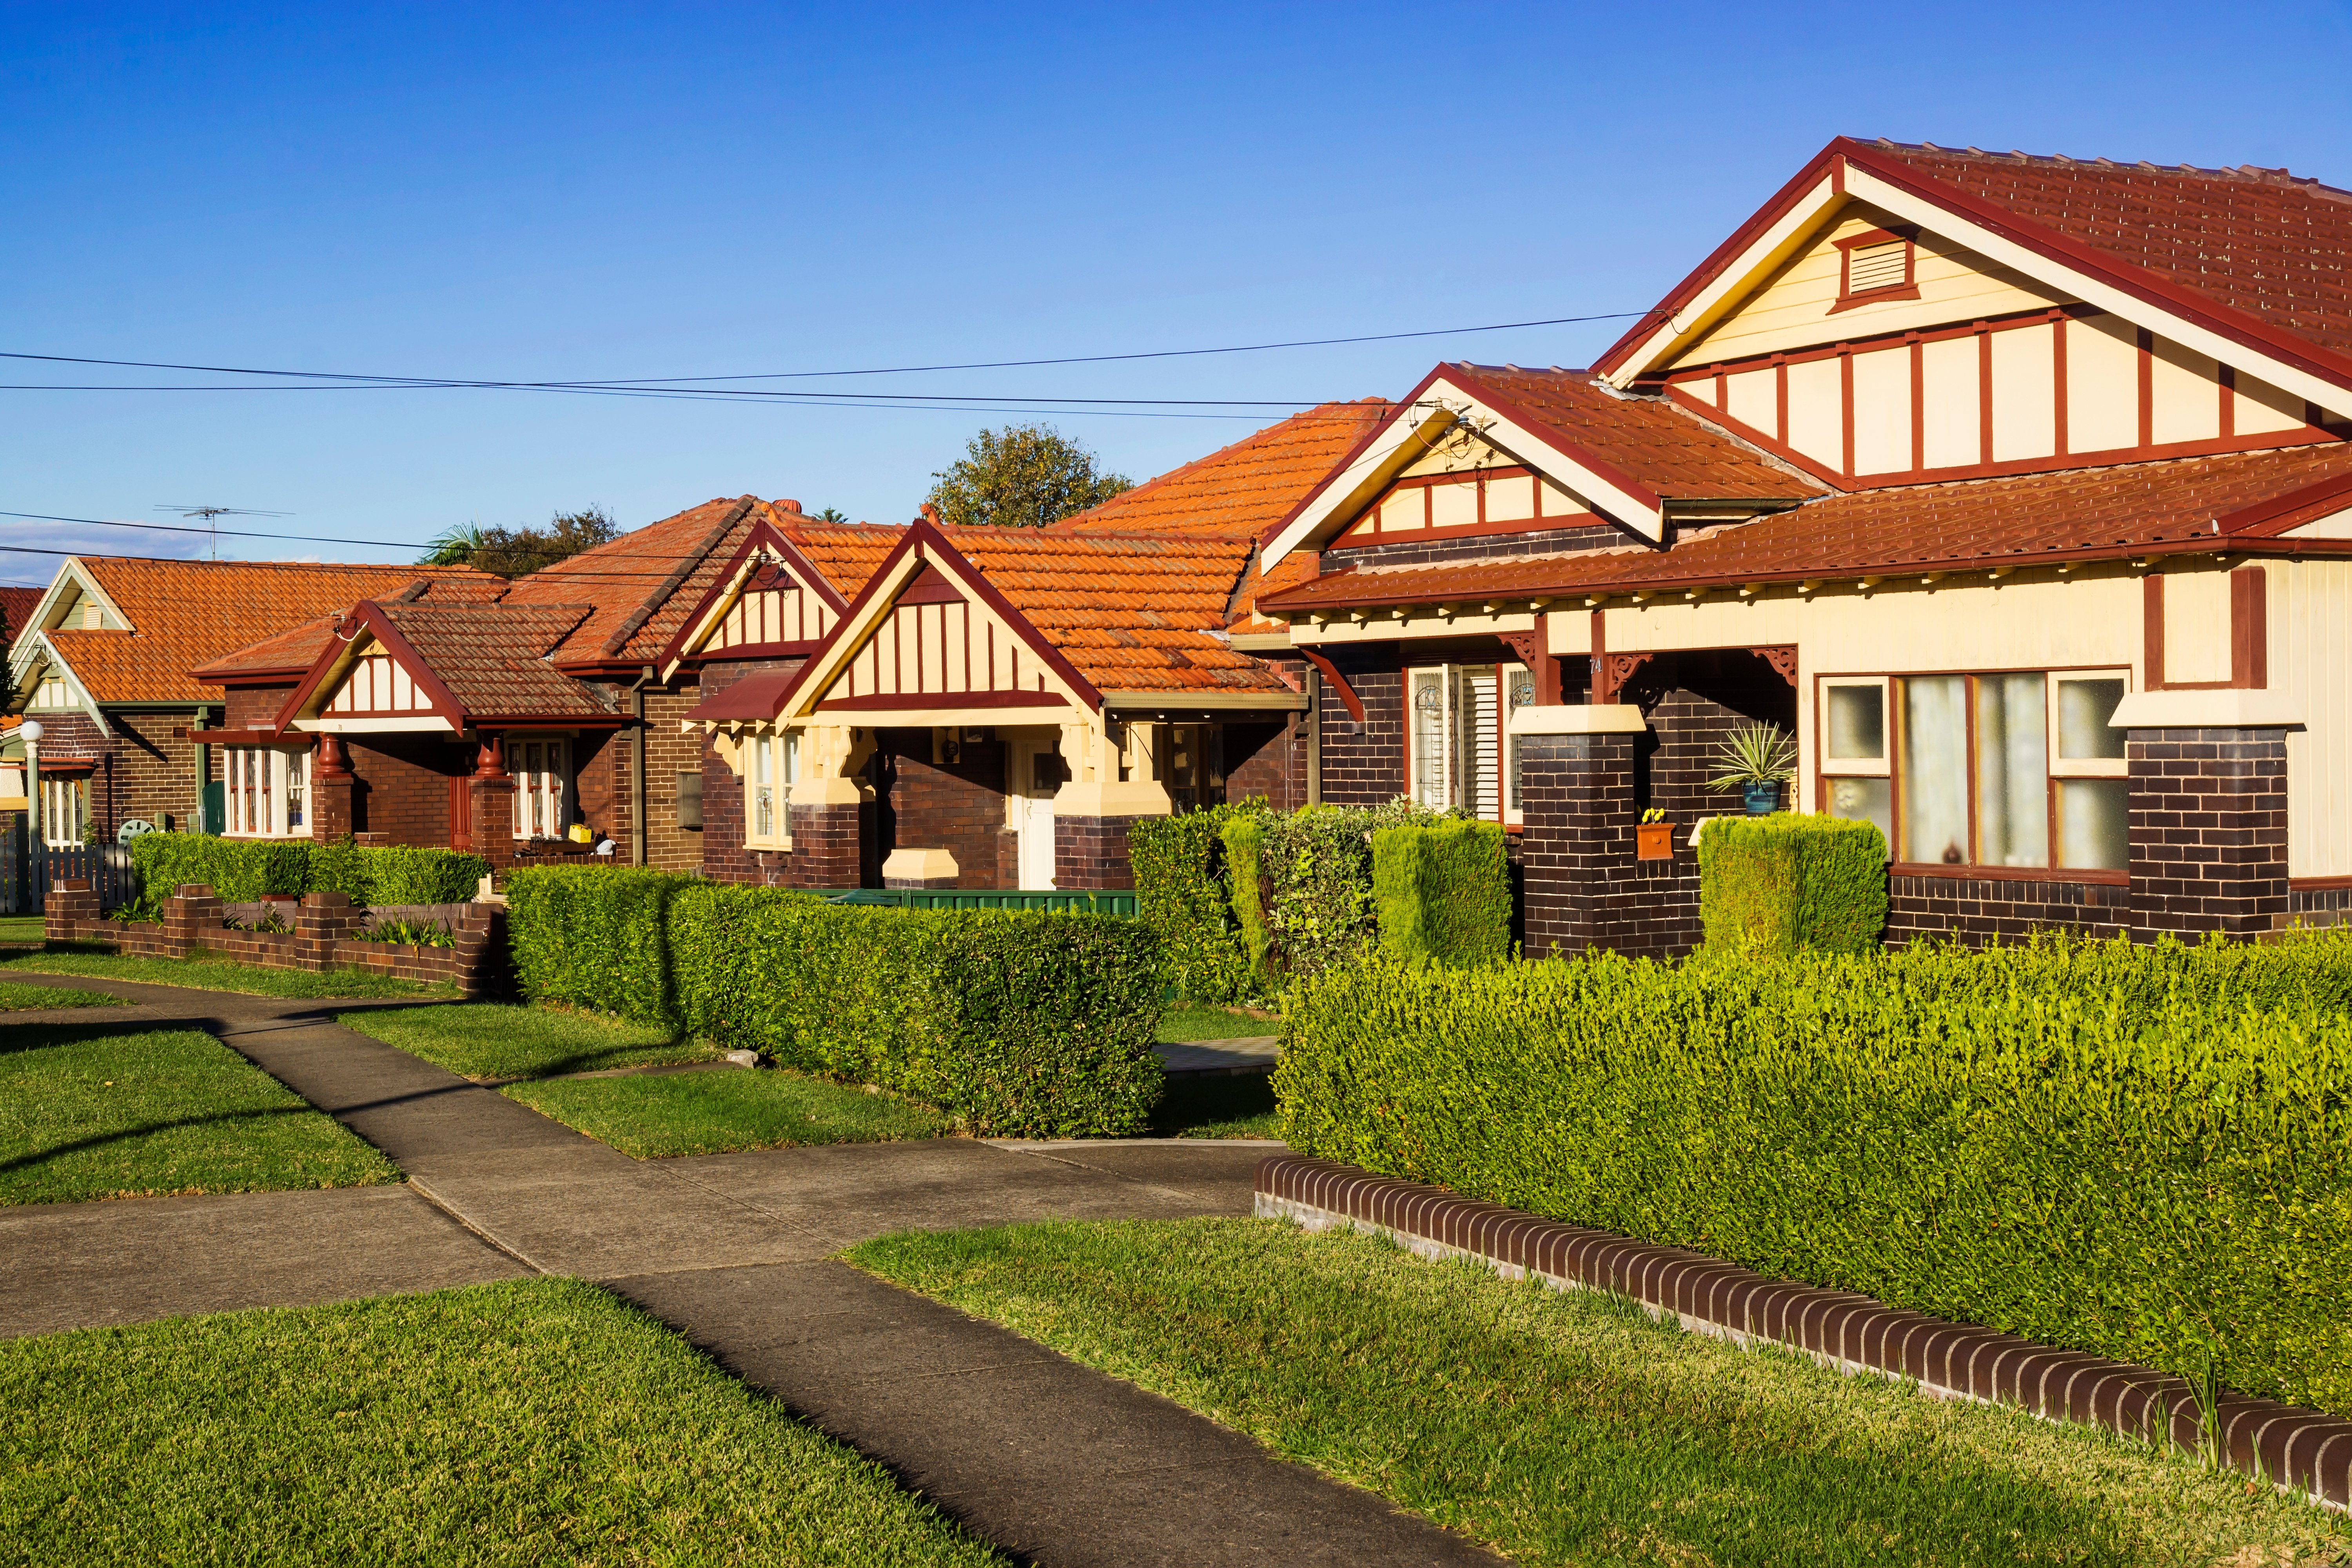 Older-Style-Houses_iStock_000069761731